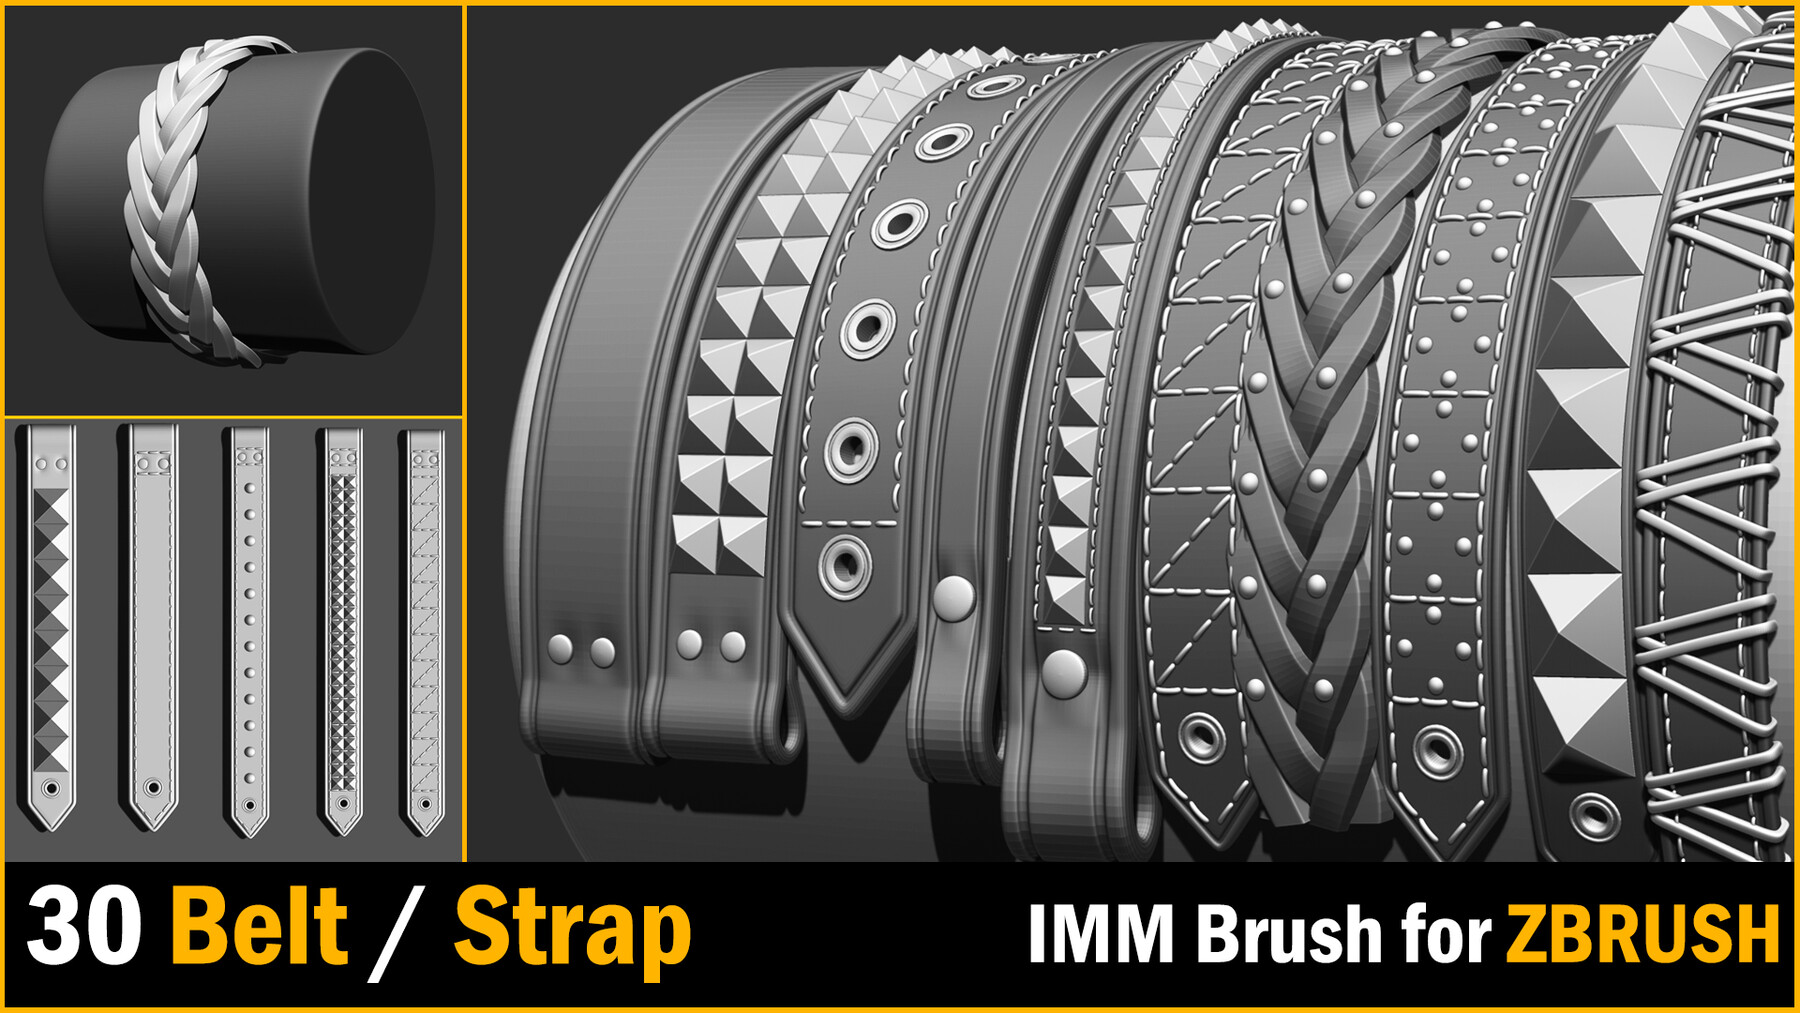 creating belts in zbrush